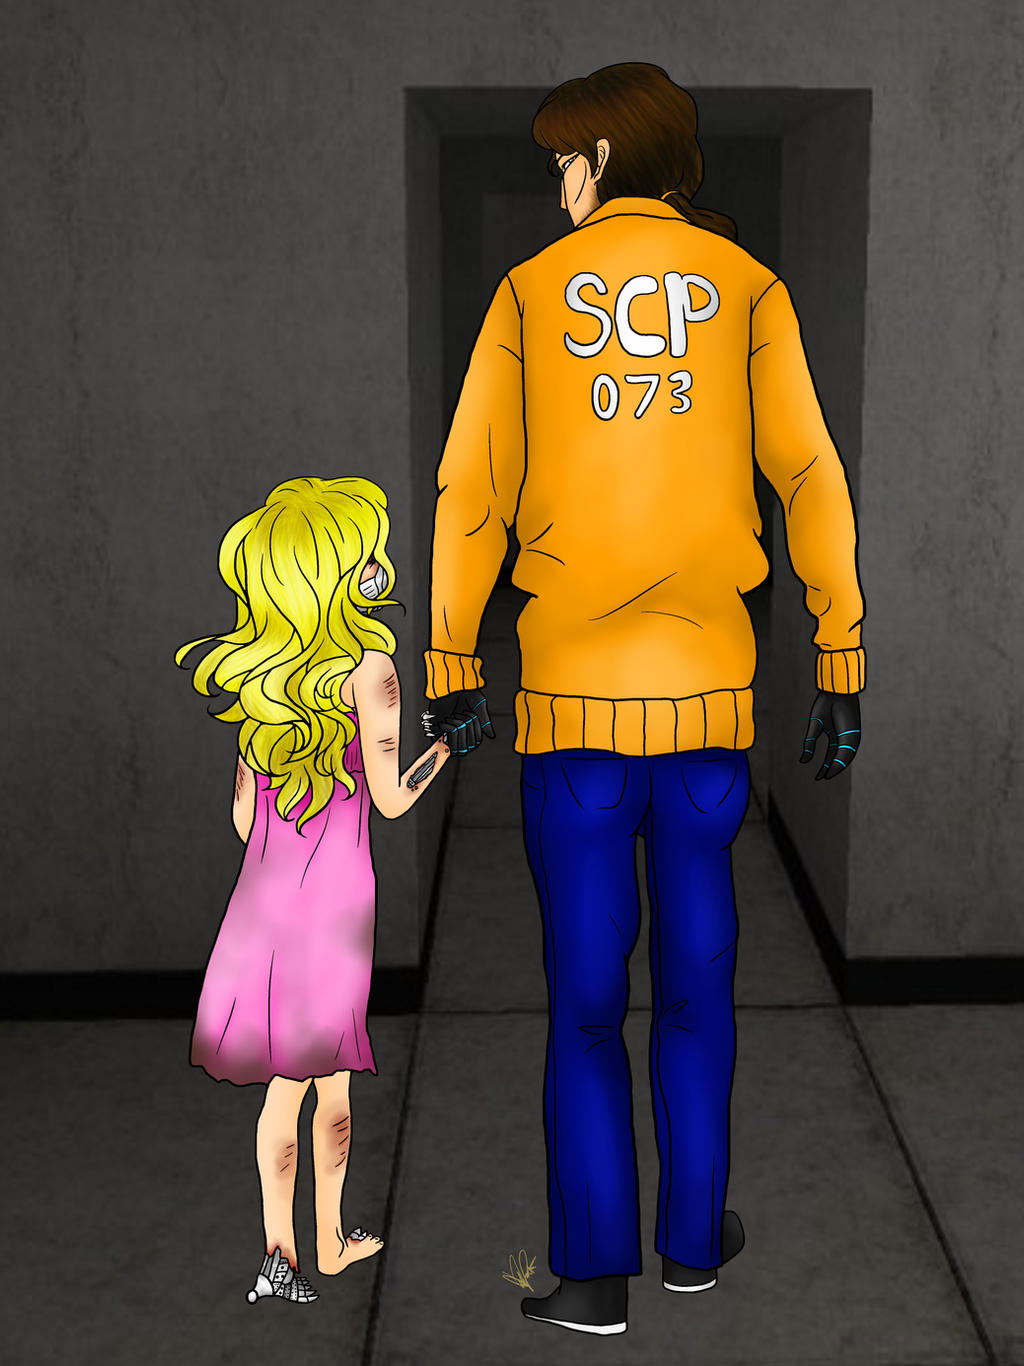 SCP-076 (Able) by BloodyGamer2003 on DeviantArt